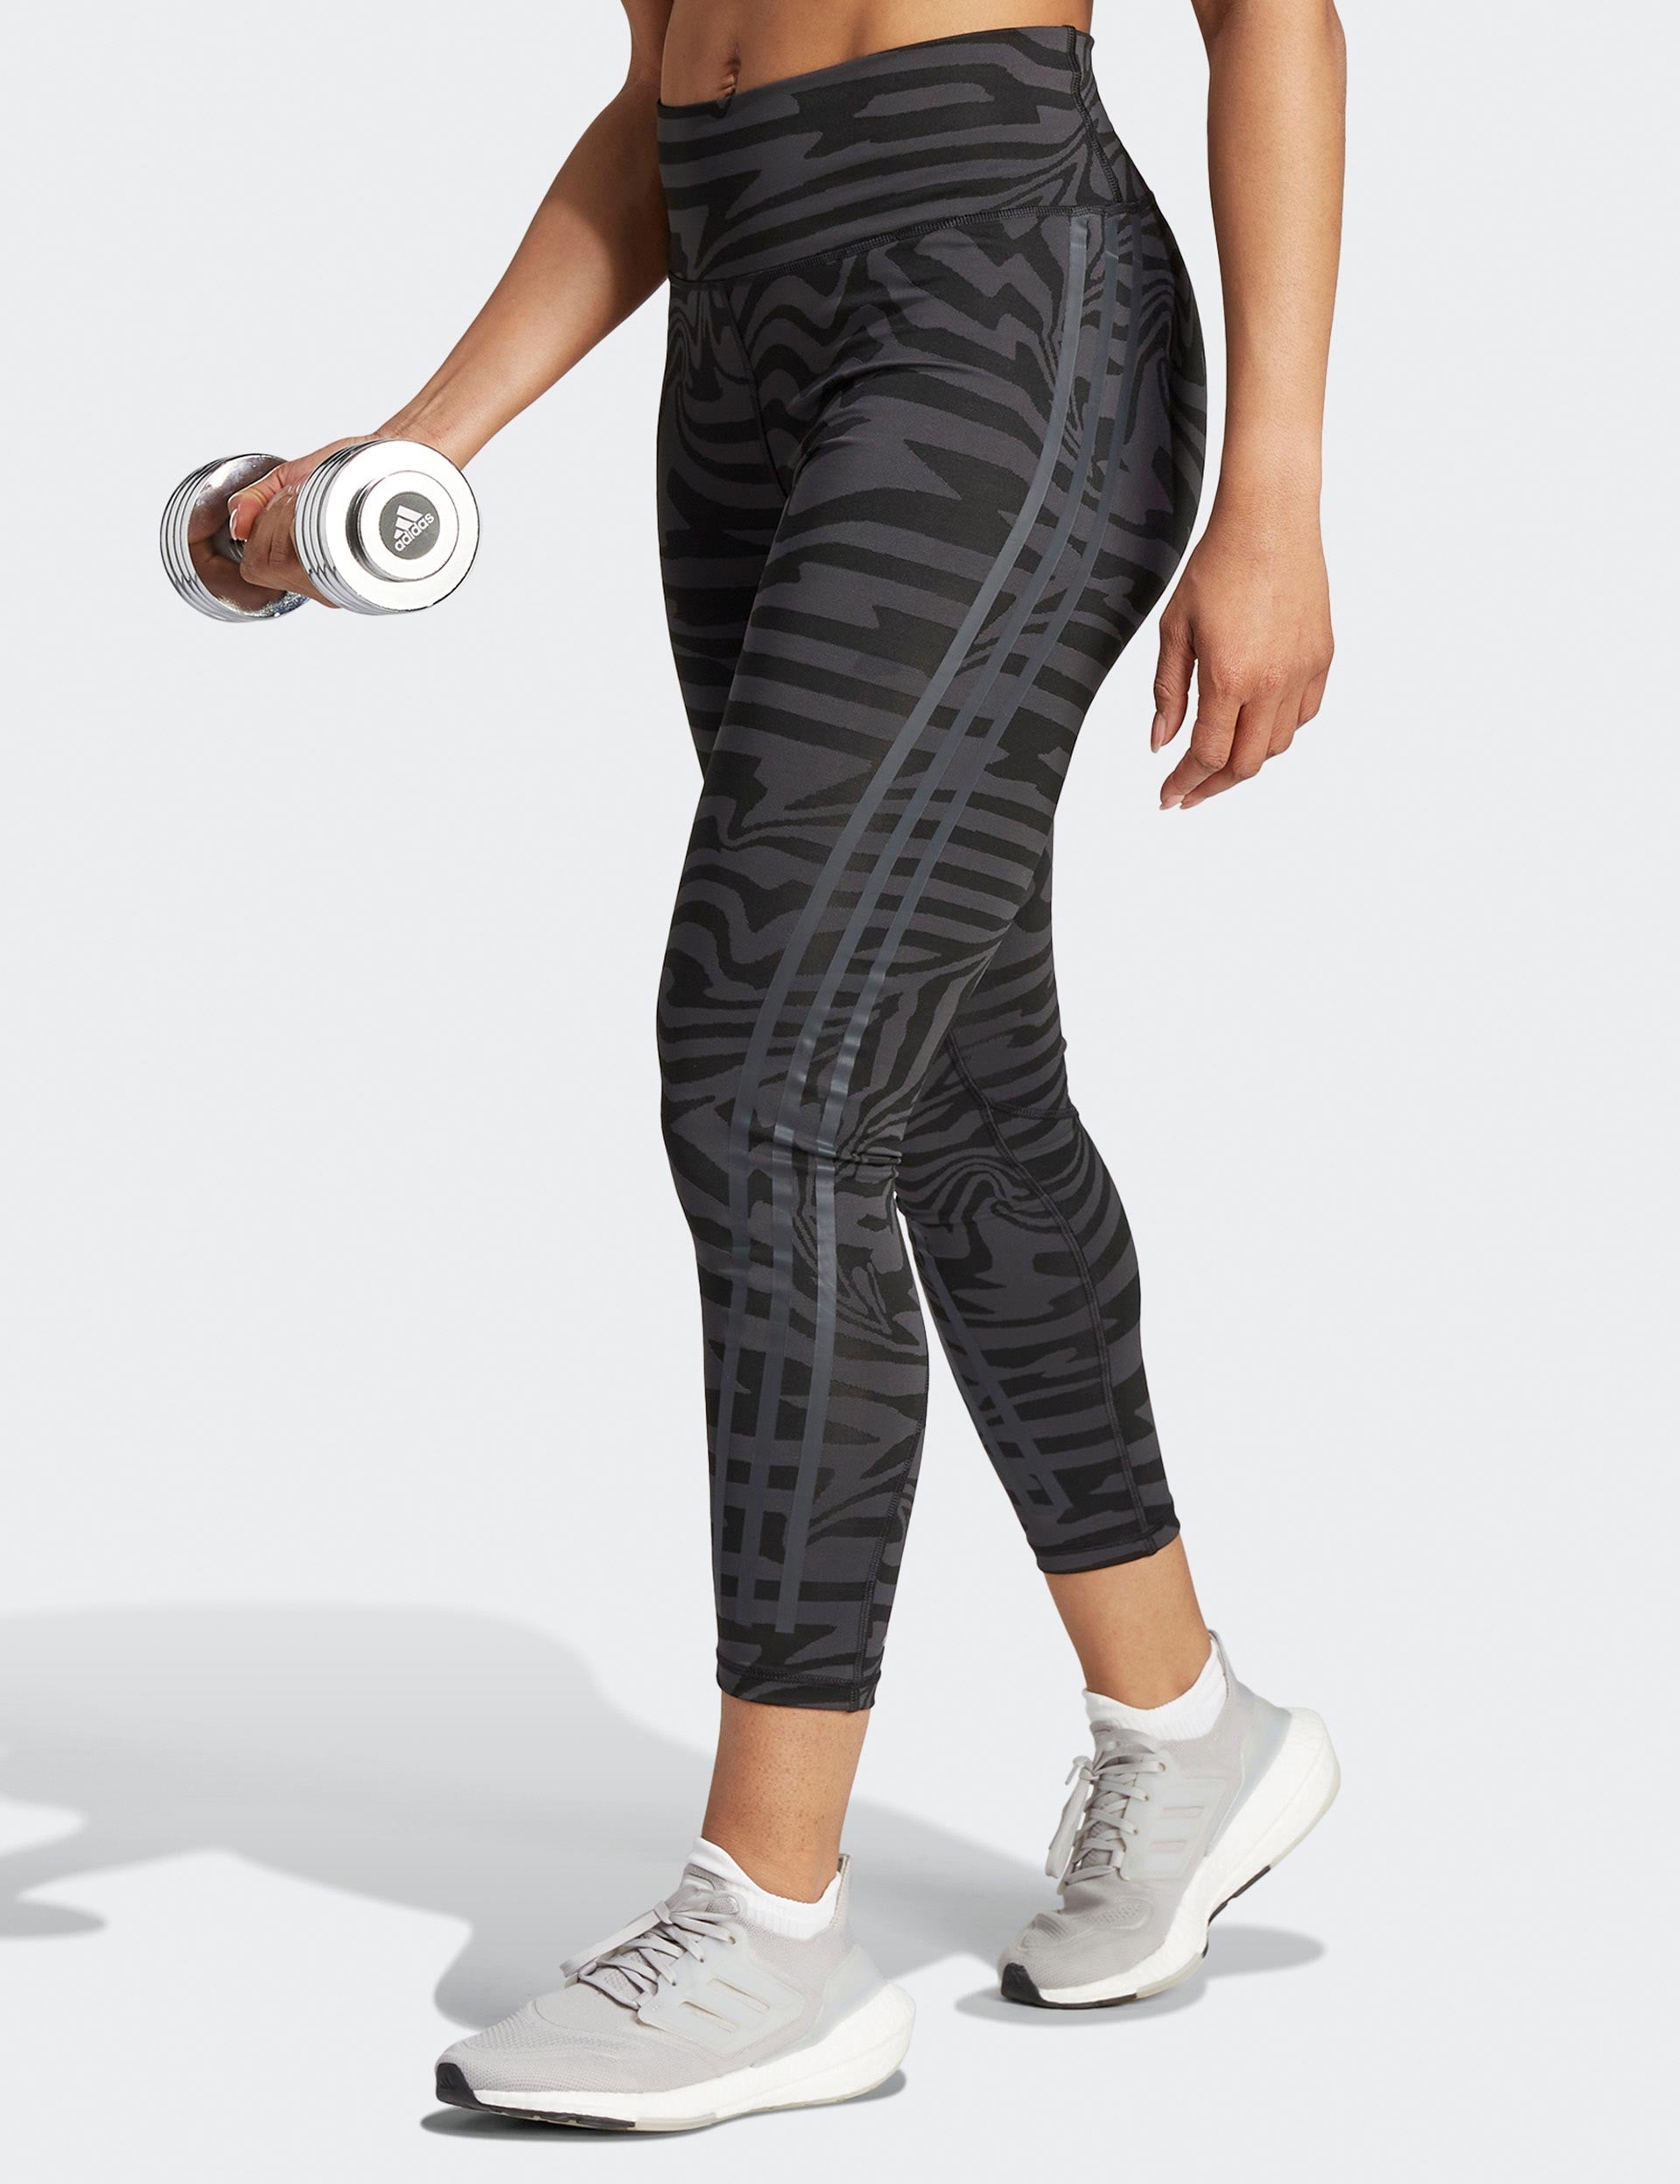 adidas 3-Stripes Mesh Tights  Performance outfit, Clothes